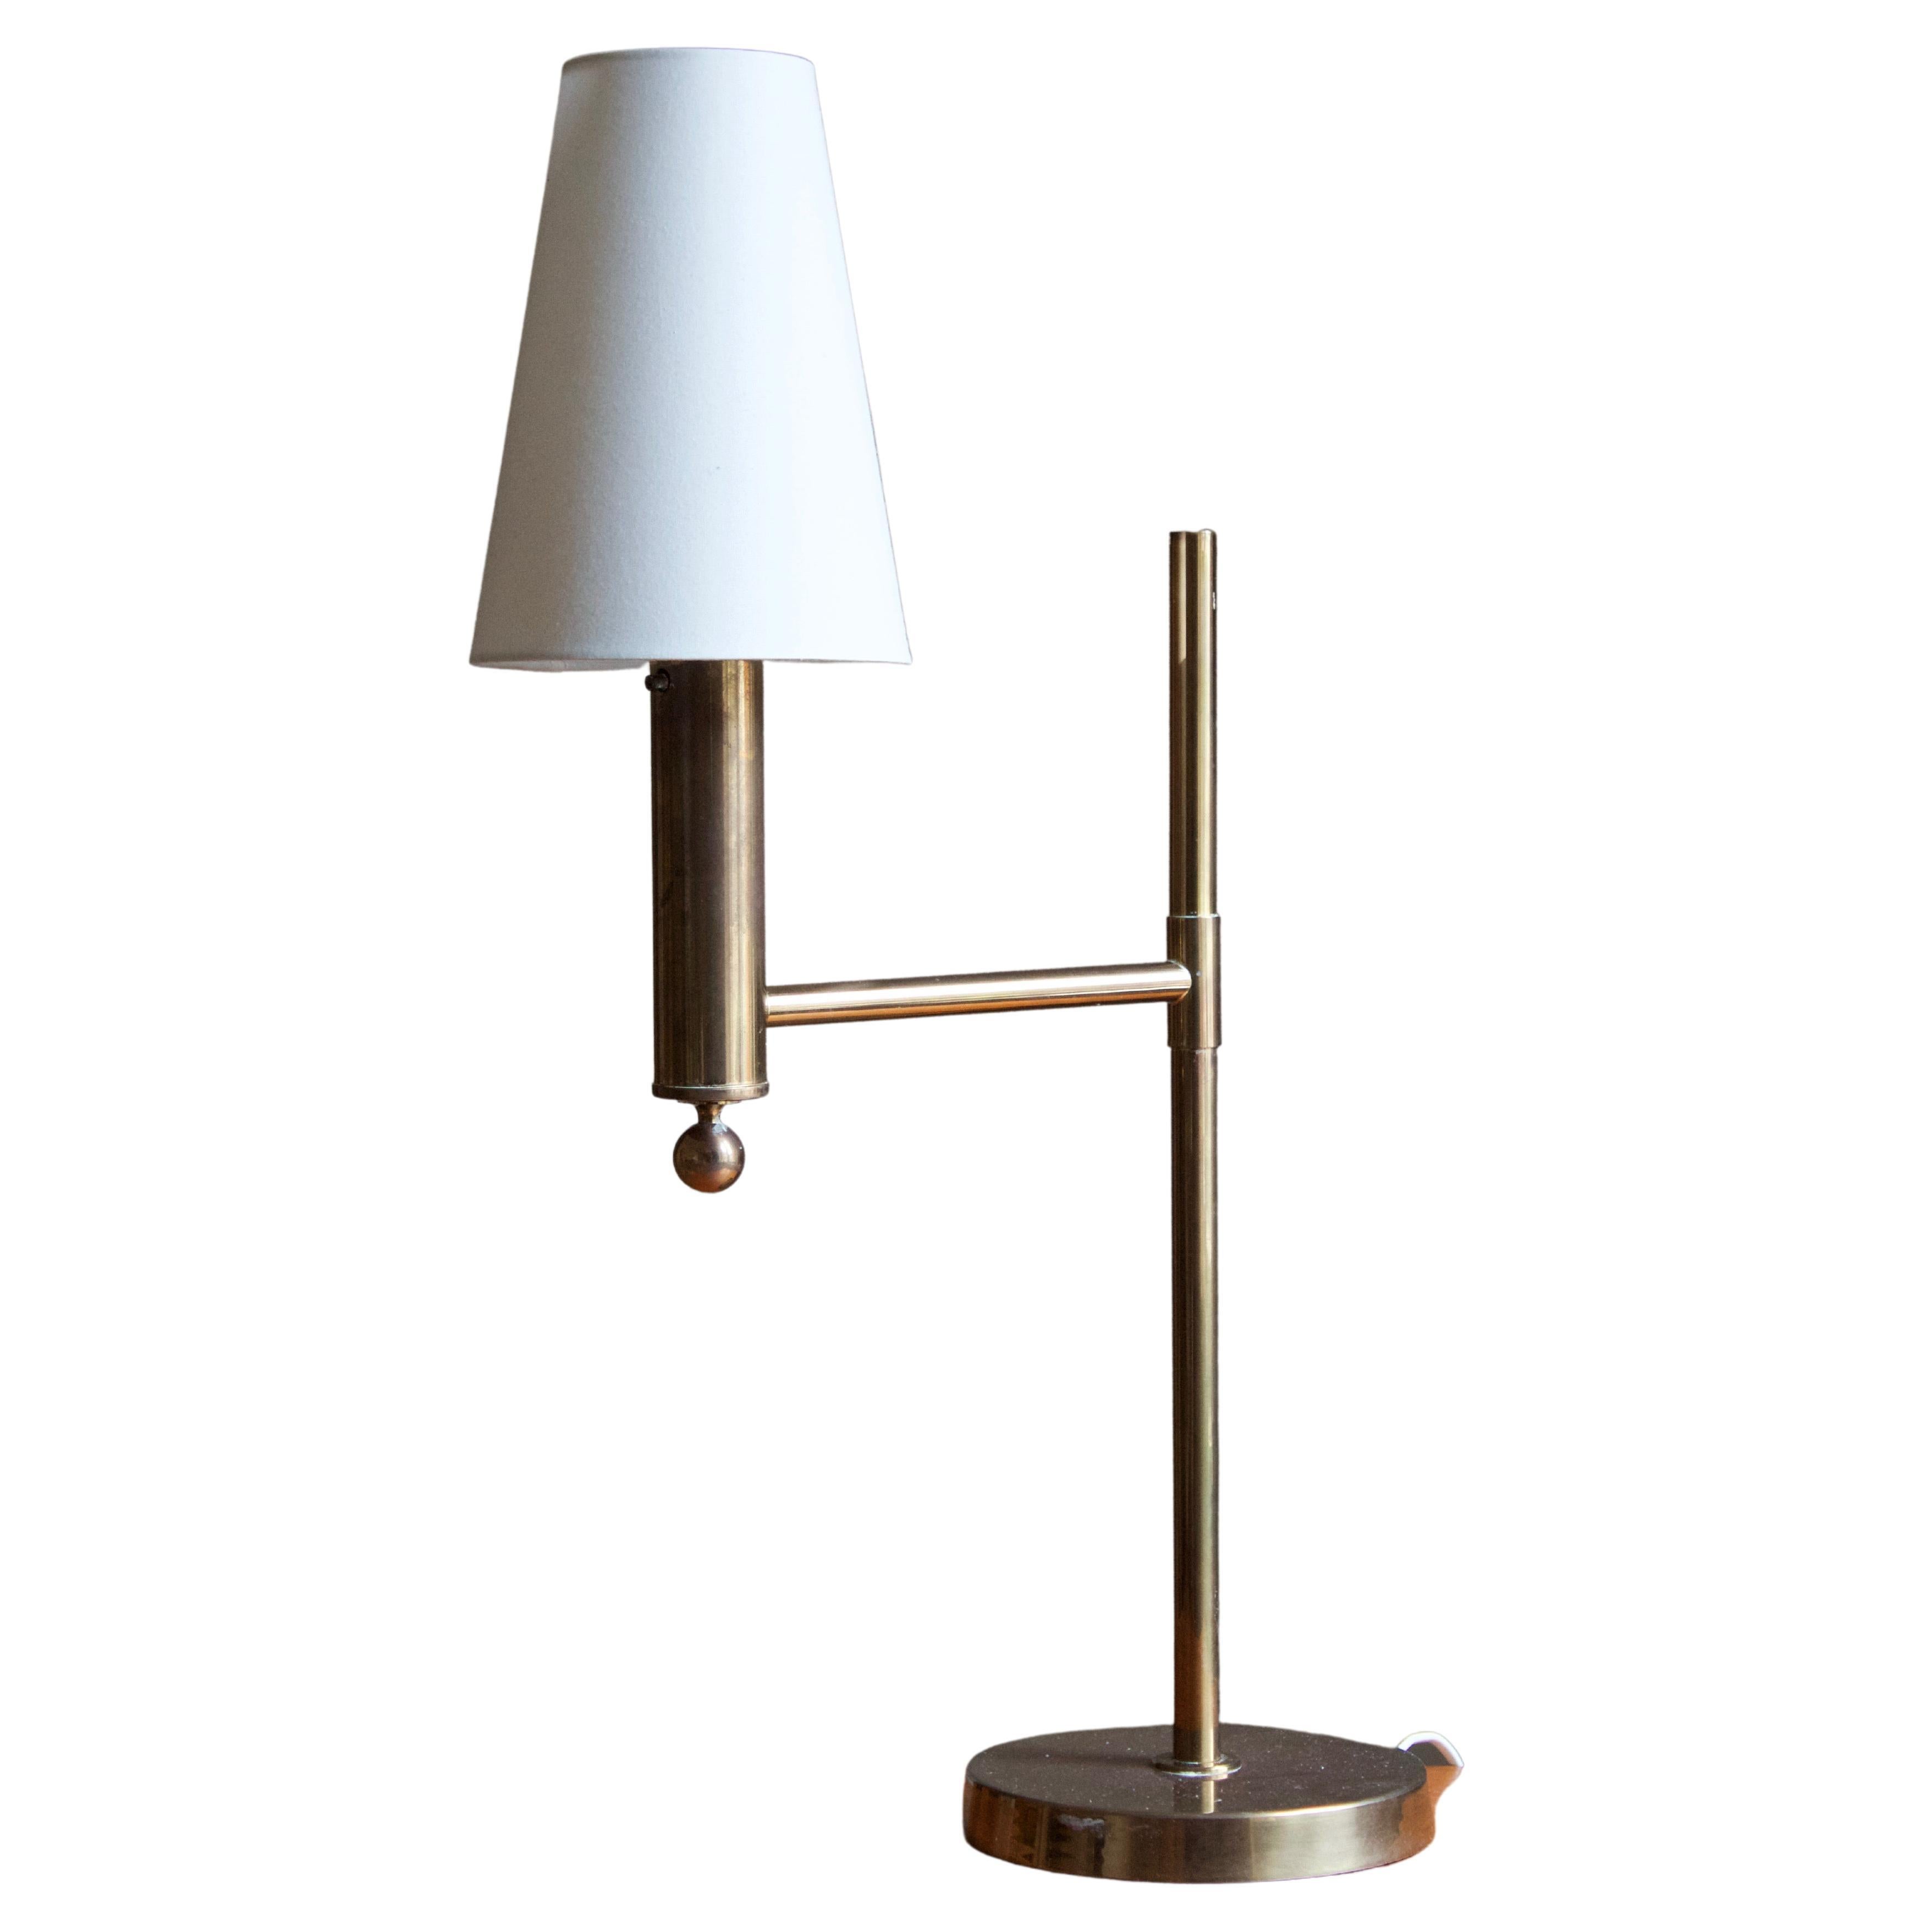 Bergboms, Sizable Table Lamp, Brass, White Fabric, Sweden, 1970s